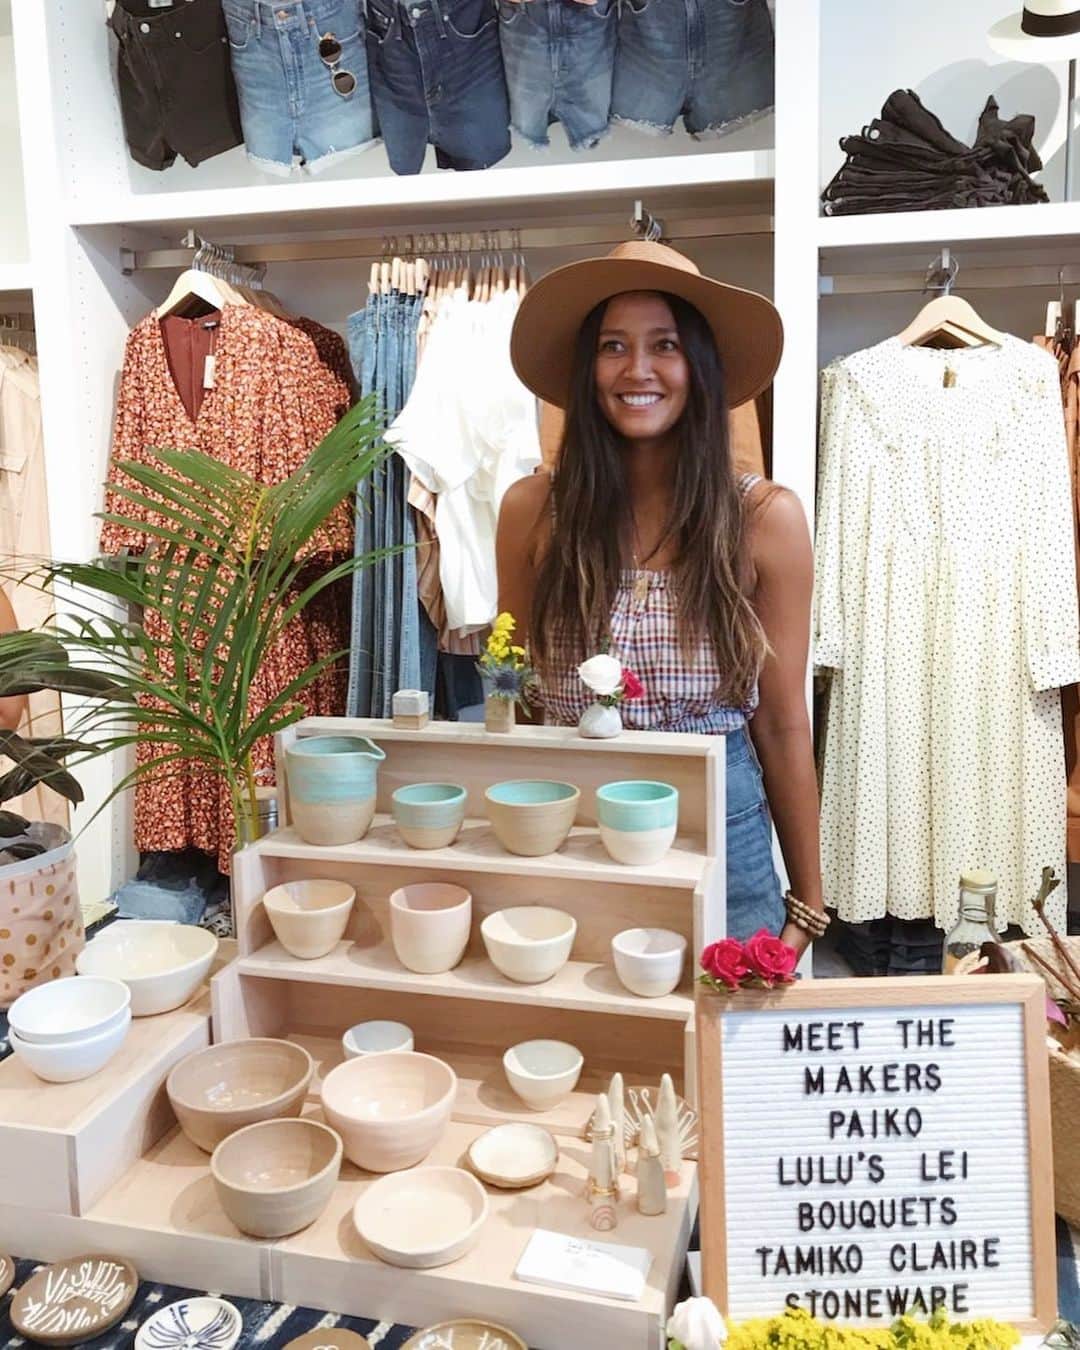 Tamikoのインスタグラム：「mahalos all around to those who came out and brought the love today to our little pop up in @madewell ala moana 🌈💗 the support keeps the dream and drive alive for local makers and artists! if you couldn’t make it today, you can still come by tomorrow, Sunday 2/16 from 1-4pm :) hope to see you there xx 明日またいるので遊びに来てください！待ってます〜 #everydaymadewell #tamikoclaire #ceramics」